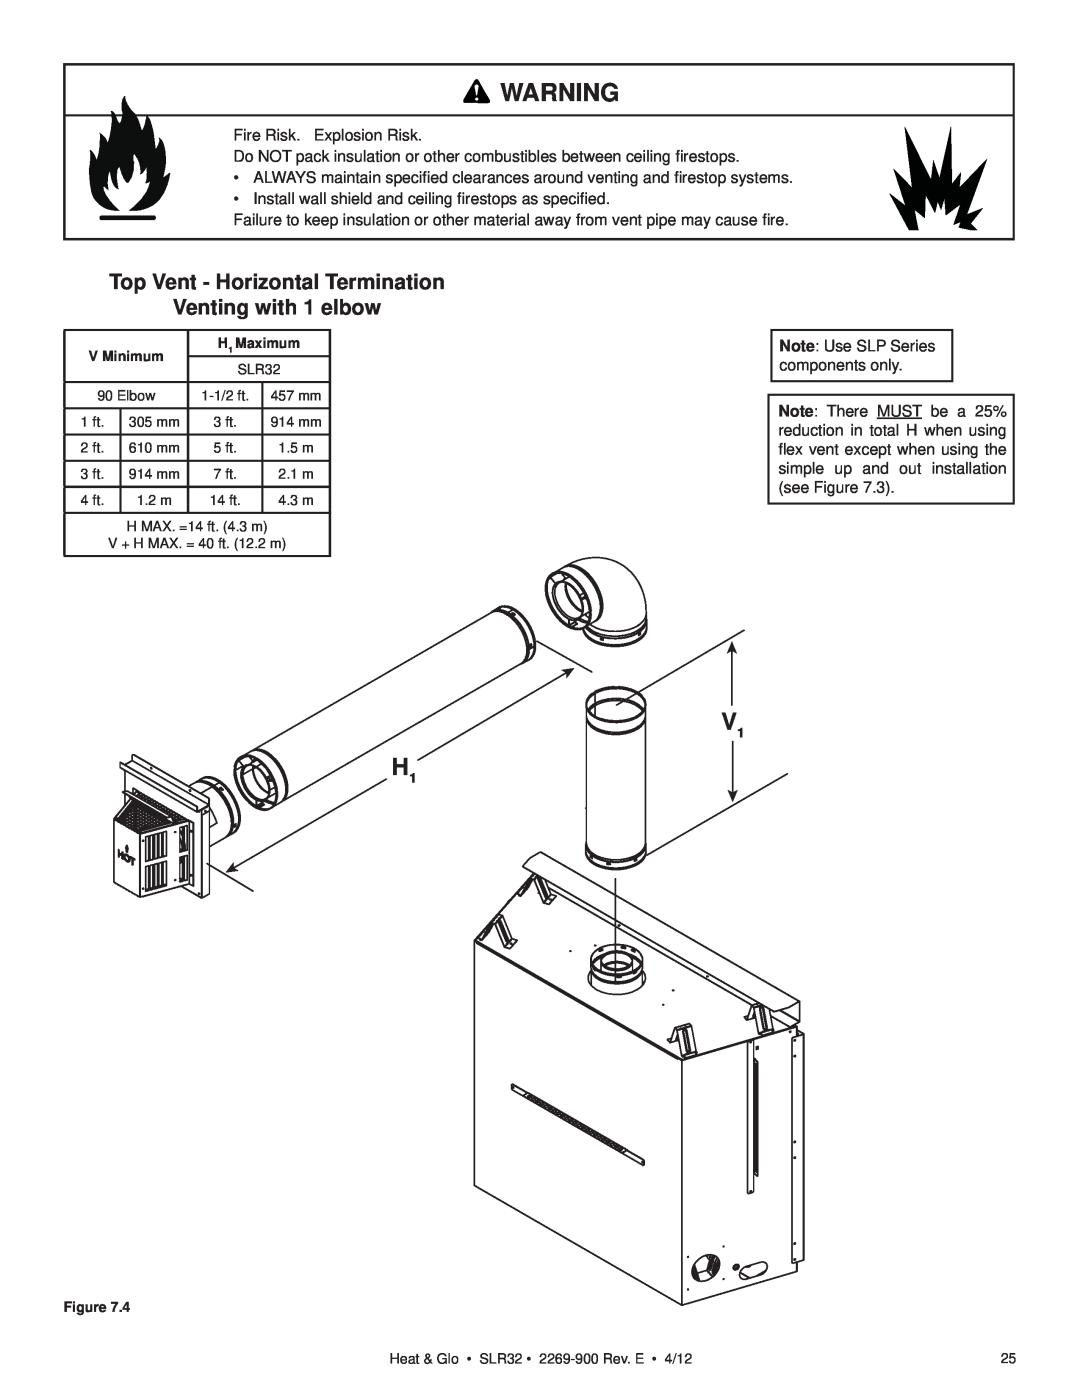 Heat & Glo LifeStyle SLR32 owner manual Top Vent - Horizontal Termination, Venting with 1 elbow 